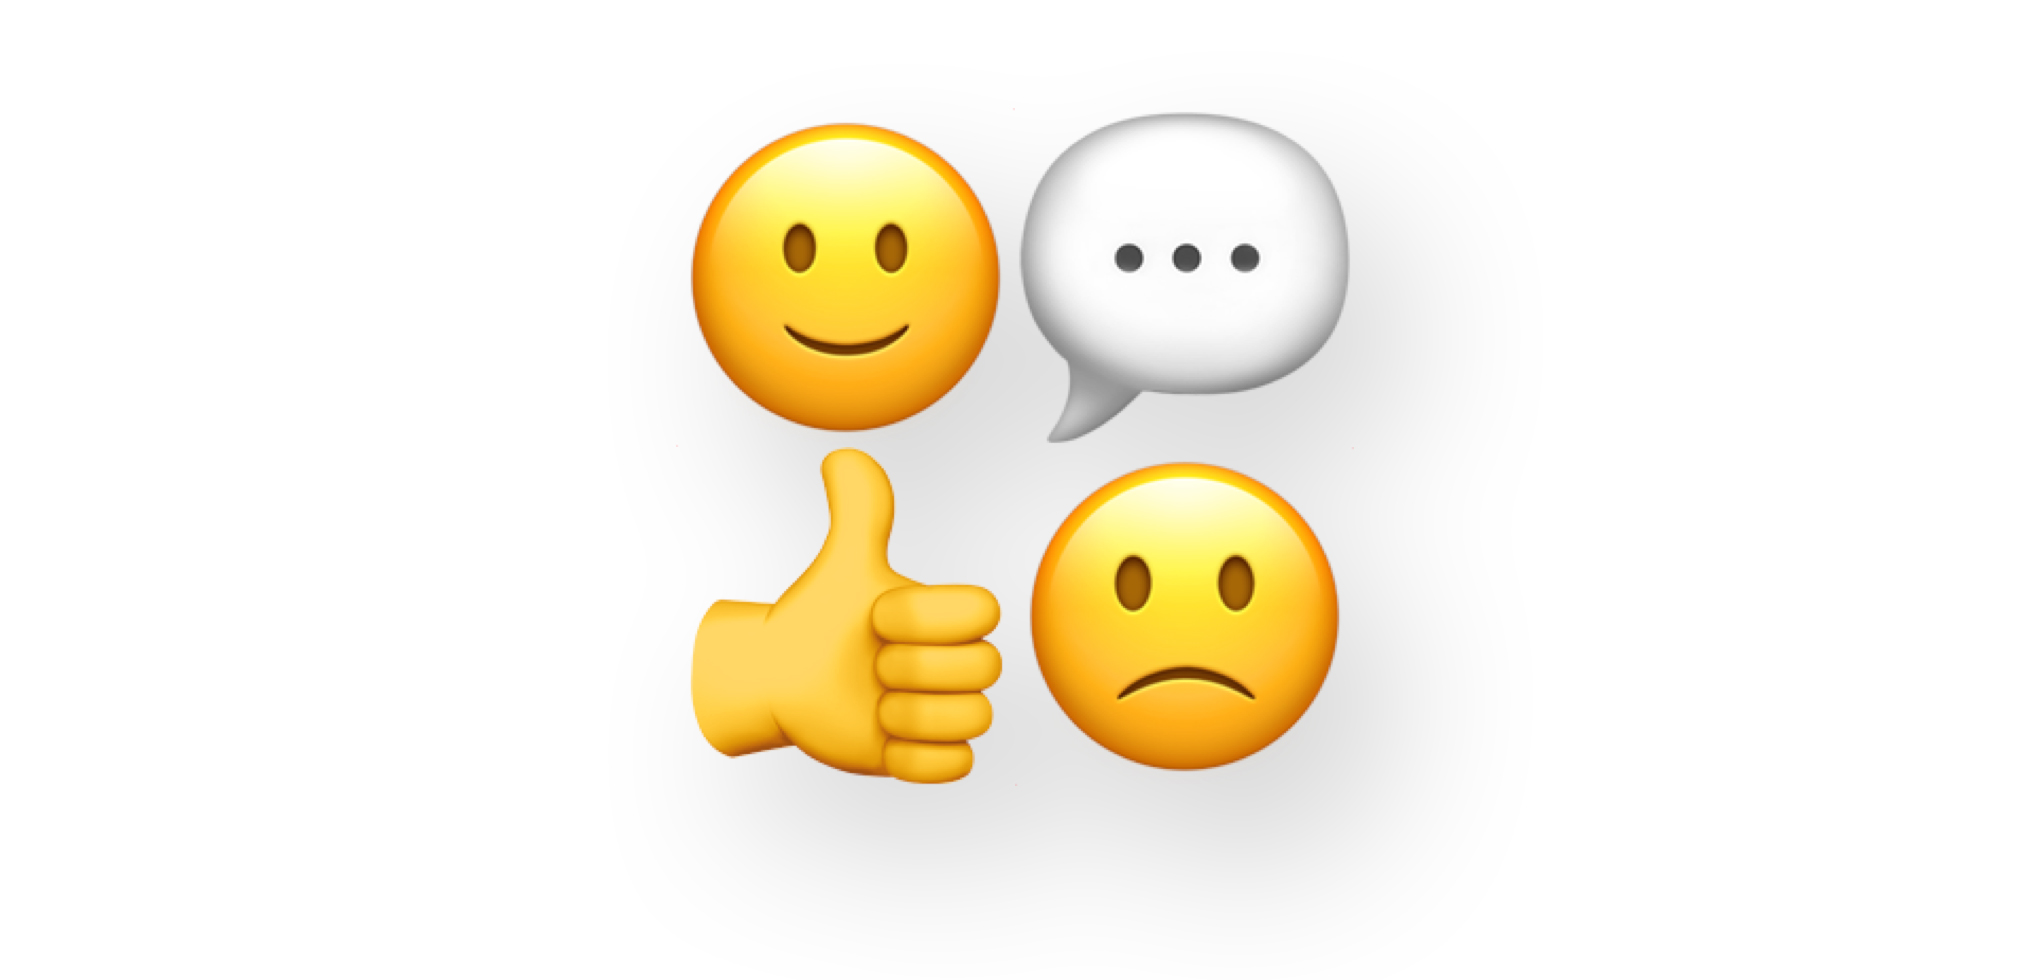 Sad, happy, thumbs up and speech bubble emoticons for feedback 